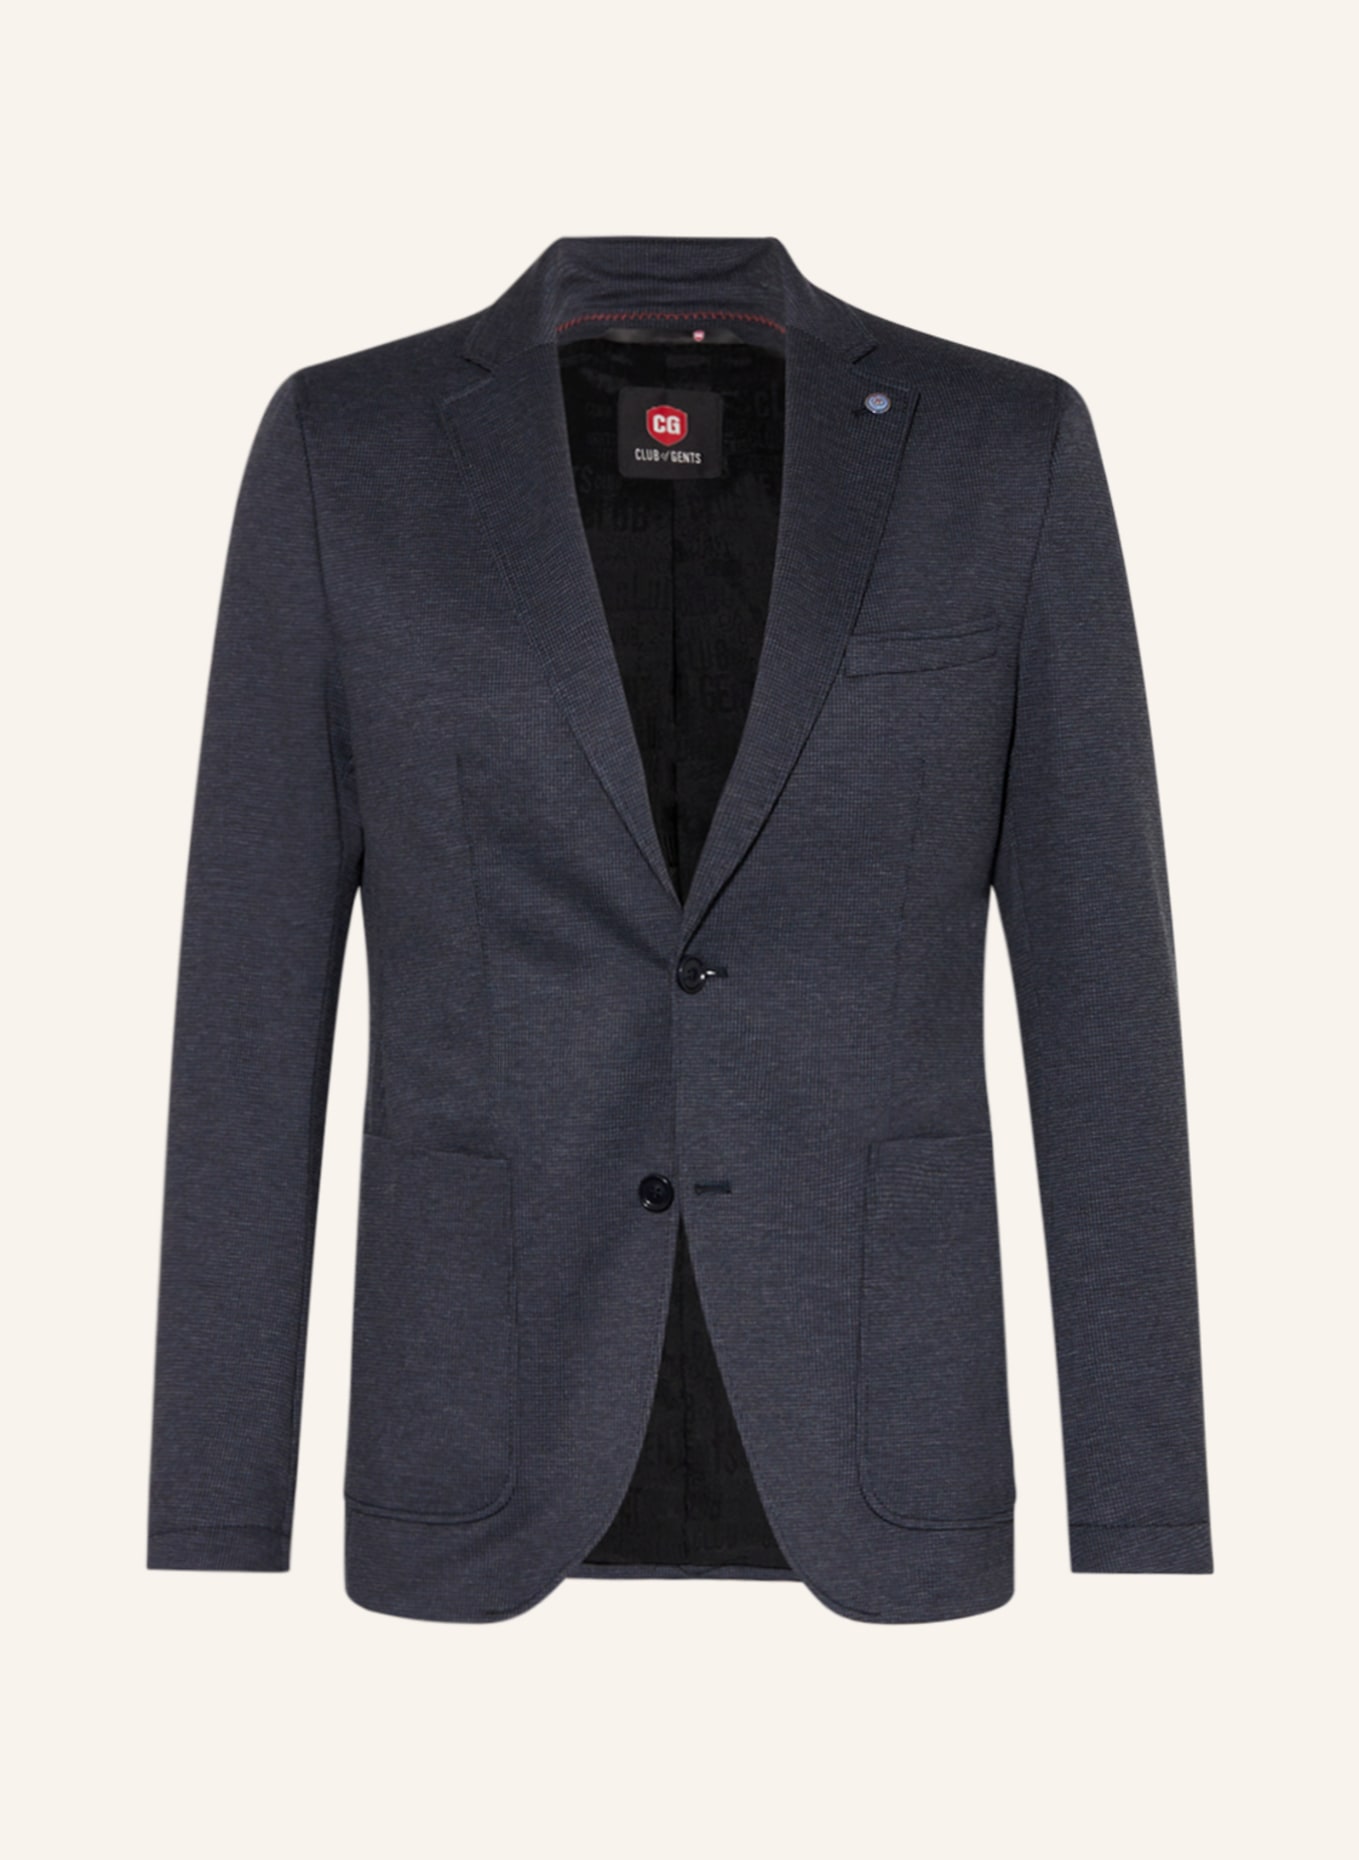 CG - CLUB of GENTS Suit jacket CUBA slim fit made of jersey, Color: 62 BLAU MITTEL (Image 1)